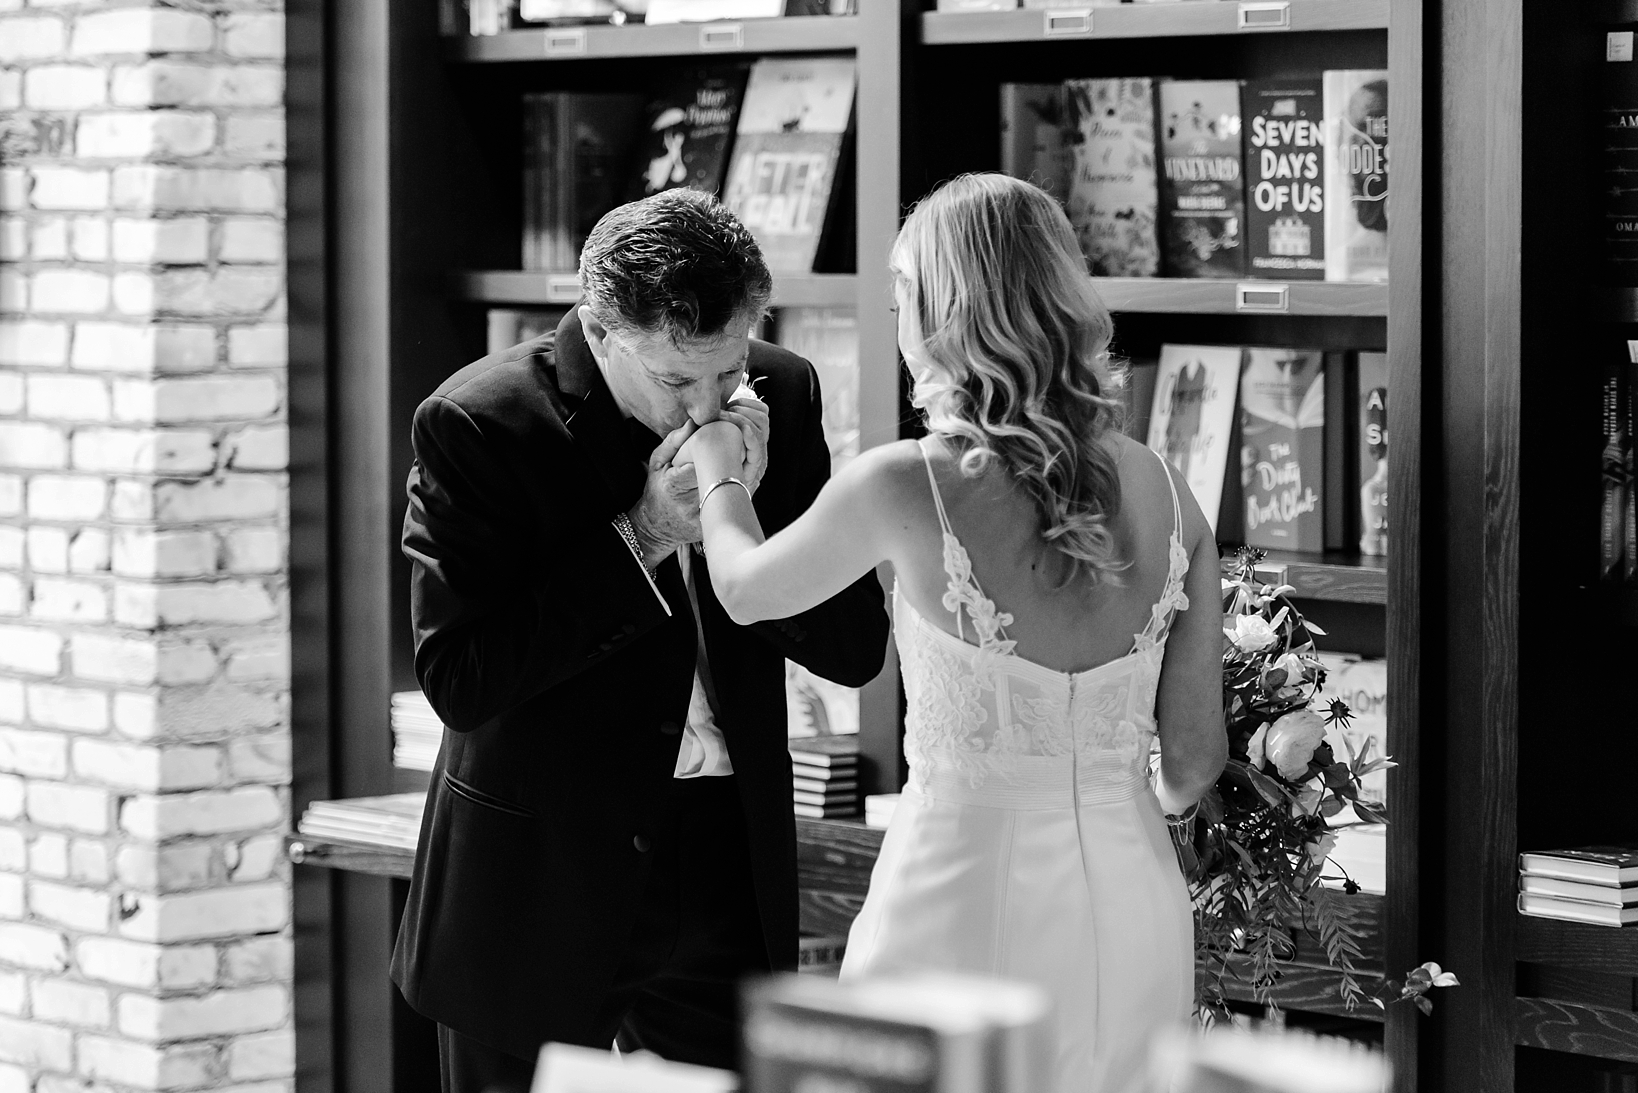 Father kisses his daughters hand in a bookstore after seeing her for the first time in her wedding dress